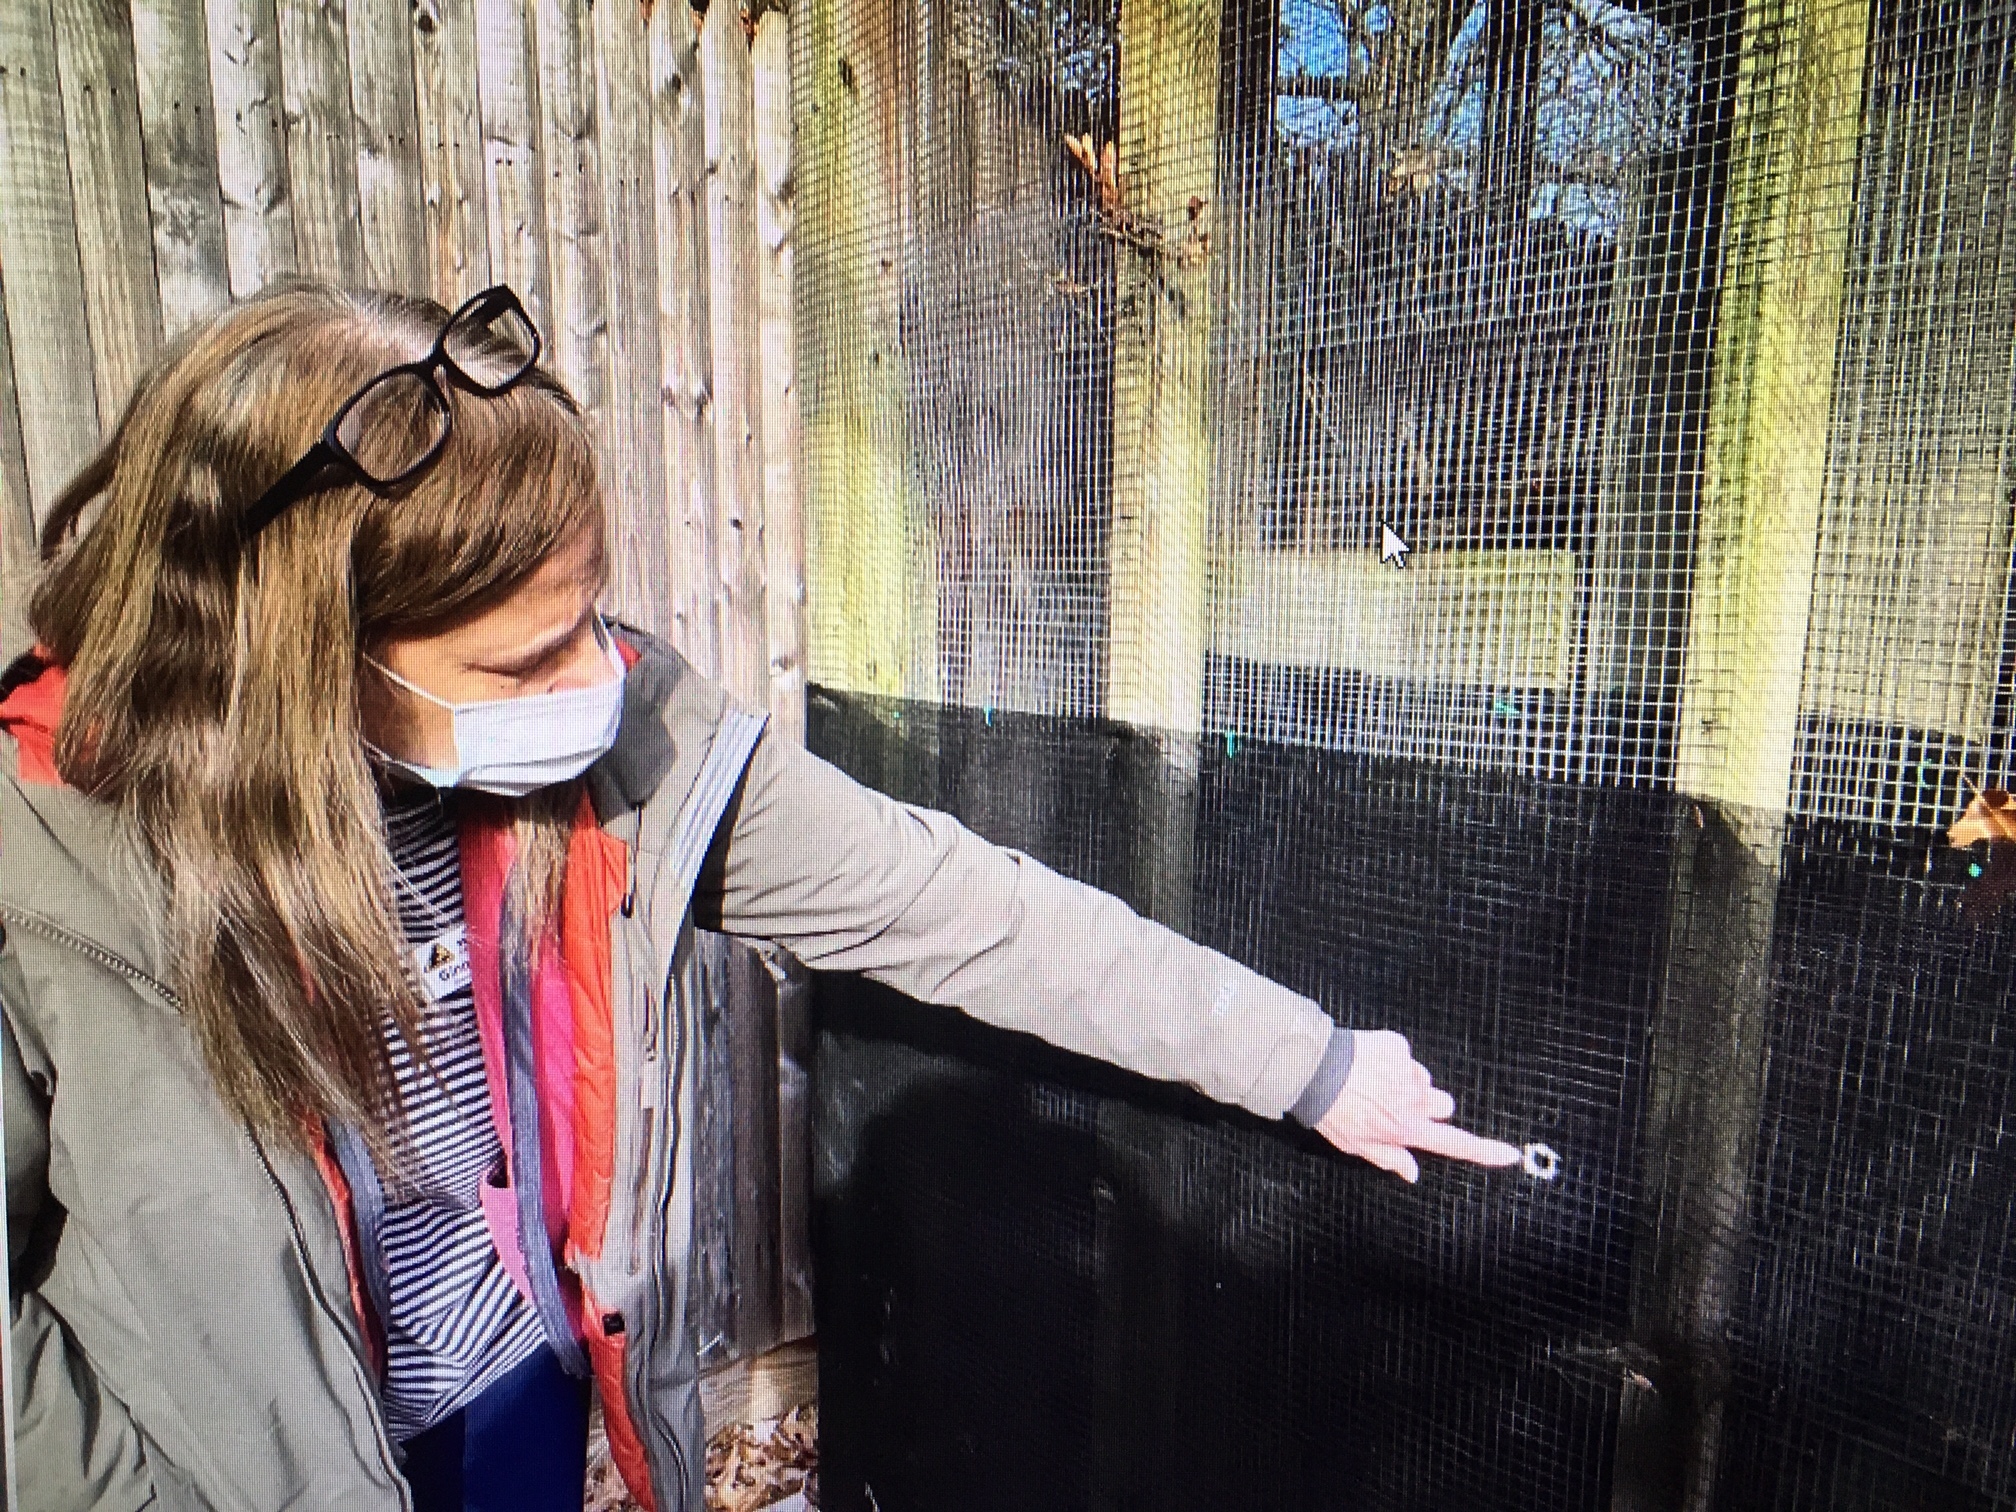 Evelyn Alexander Wildlife Rescue Center executive director Ginnie Frati pointed out bullet holes in an enclosure after the January shooting.    DANA SHAW